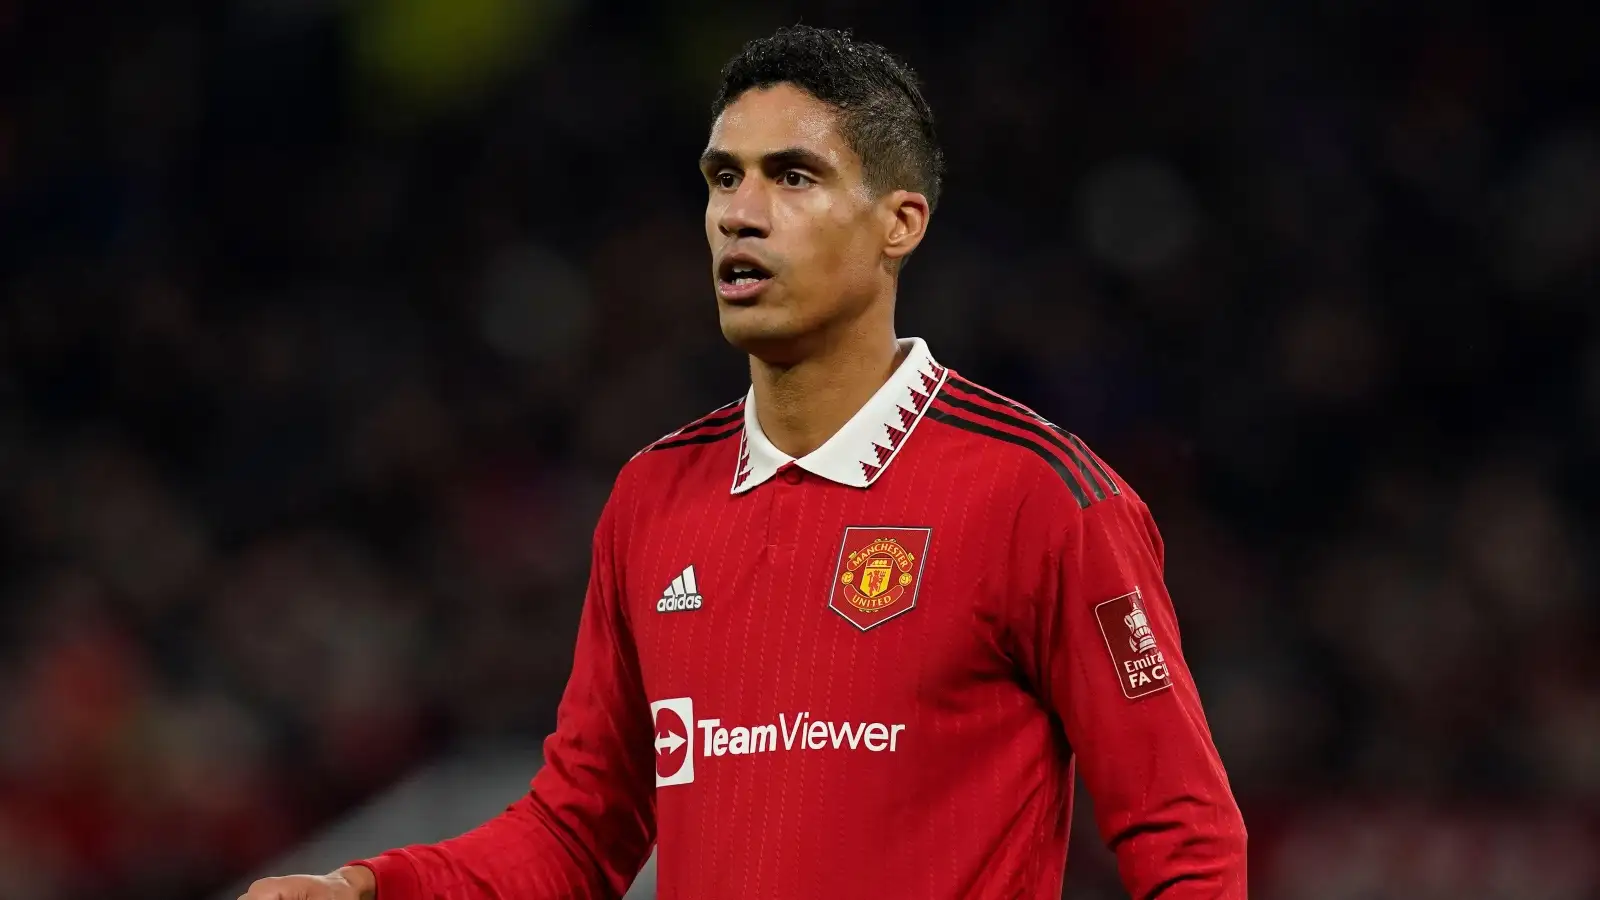 Watch: Raphael Varane leaves Everton man red-faced with silky turn